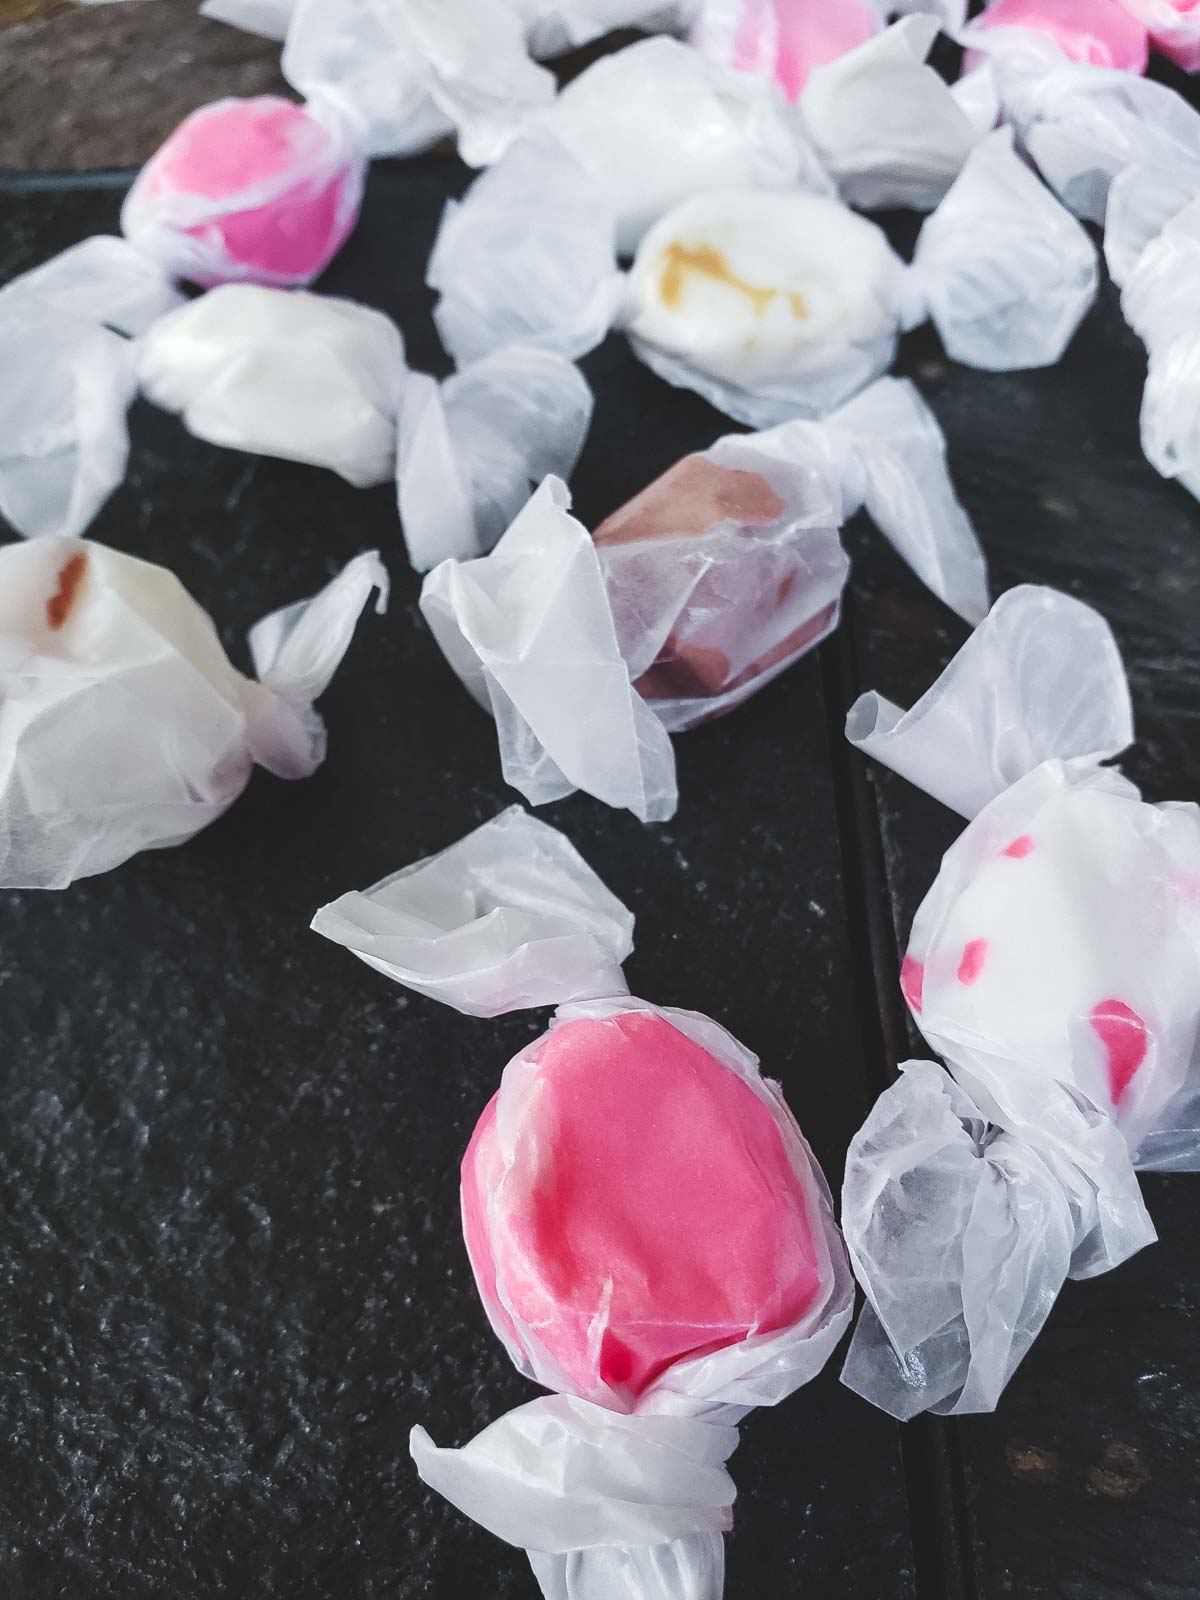 A handful of freshly made delicious salt water taffy from Seaside Oregon.